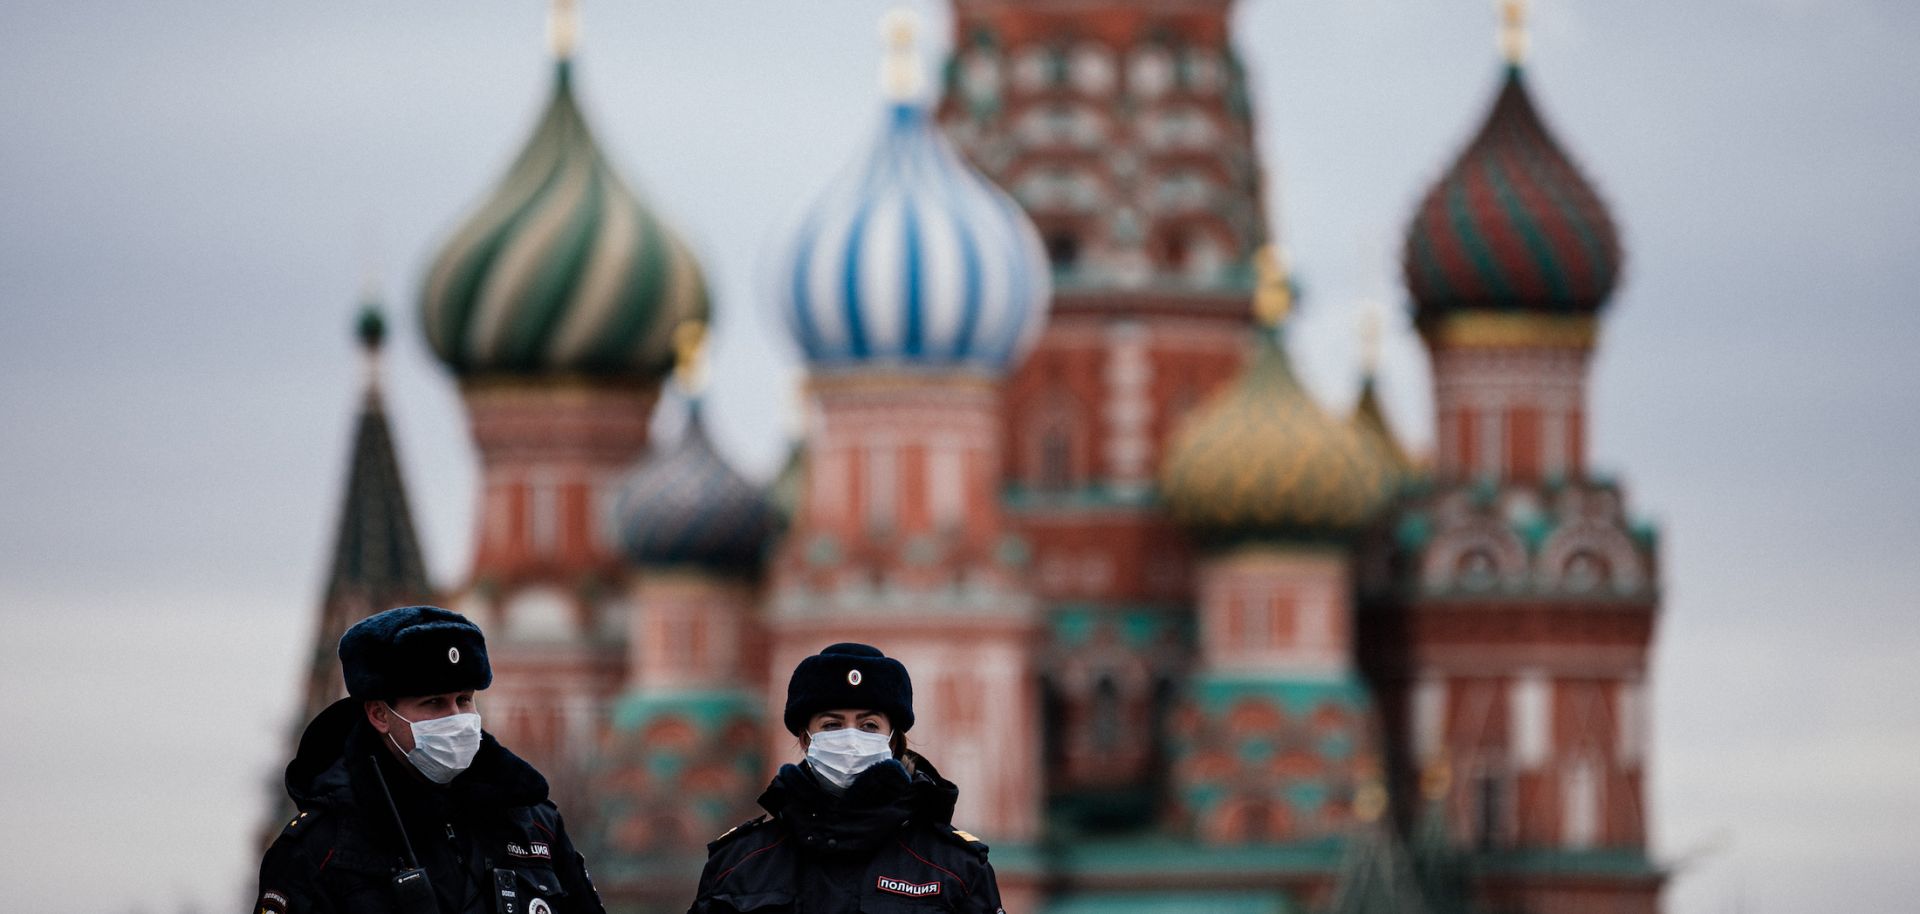 Russian police officers patrol Red square in front of Saint Basil's Cathedral in Moscow